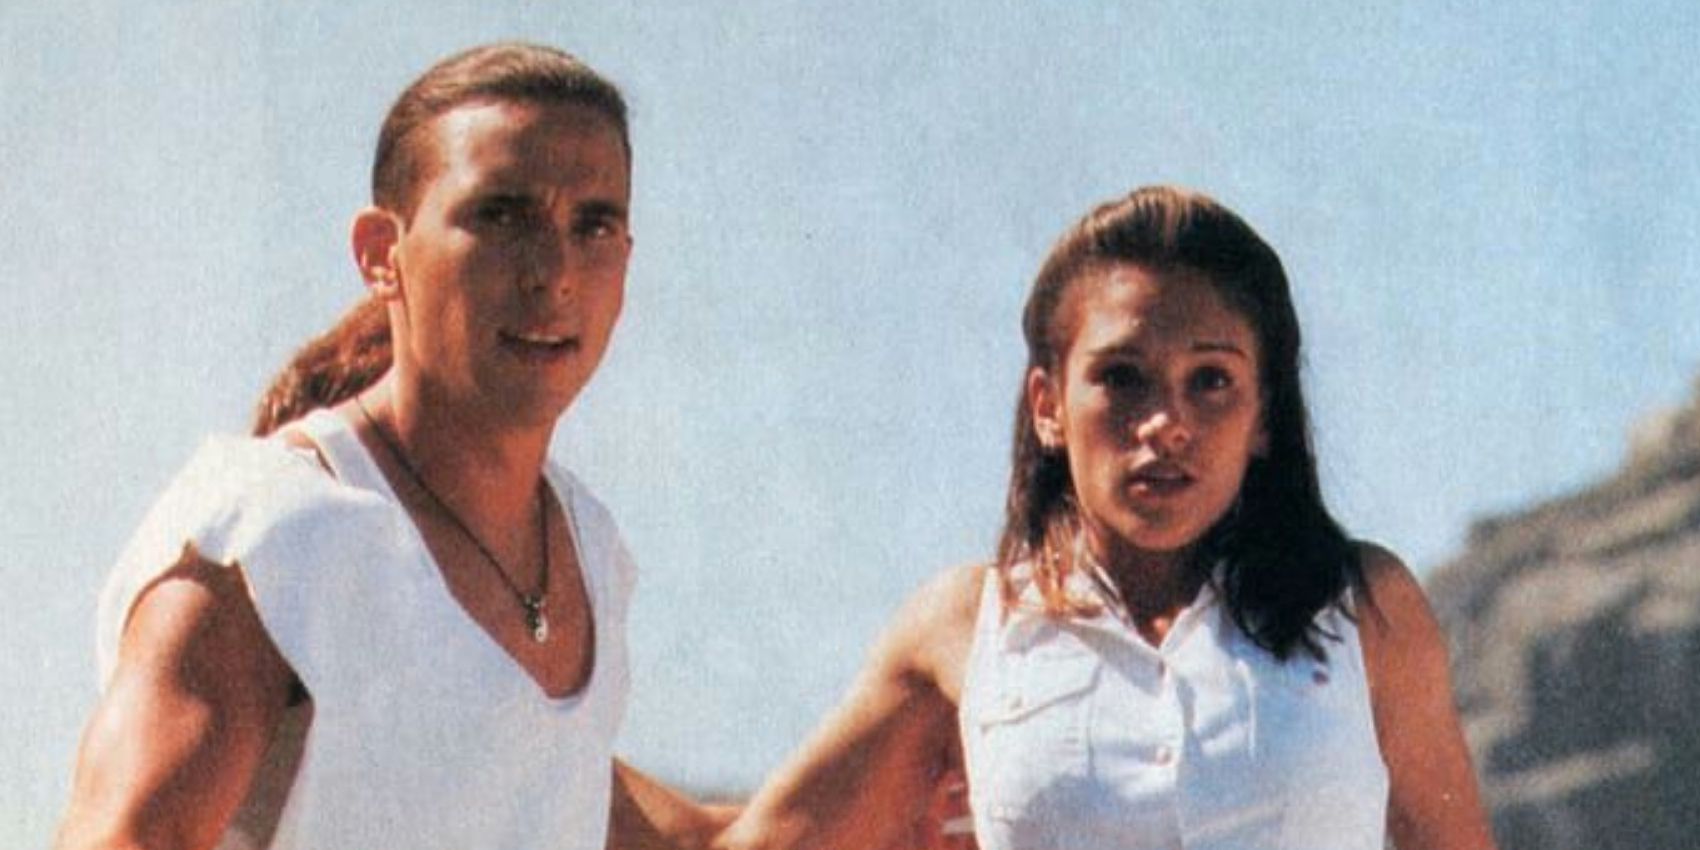 Tommy And Kimberly In Original Power Rangers Movie